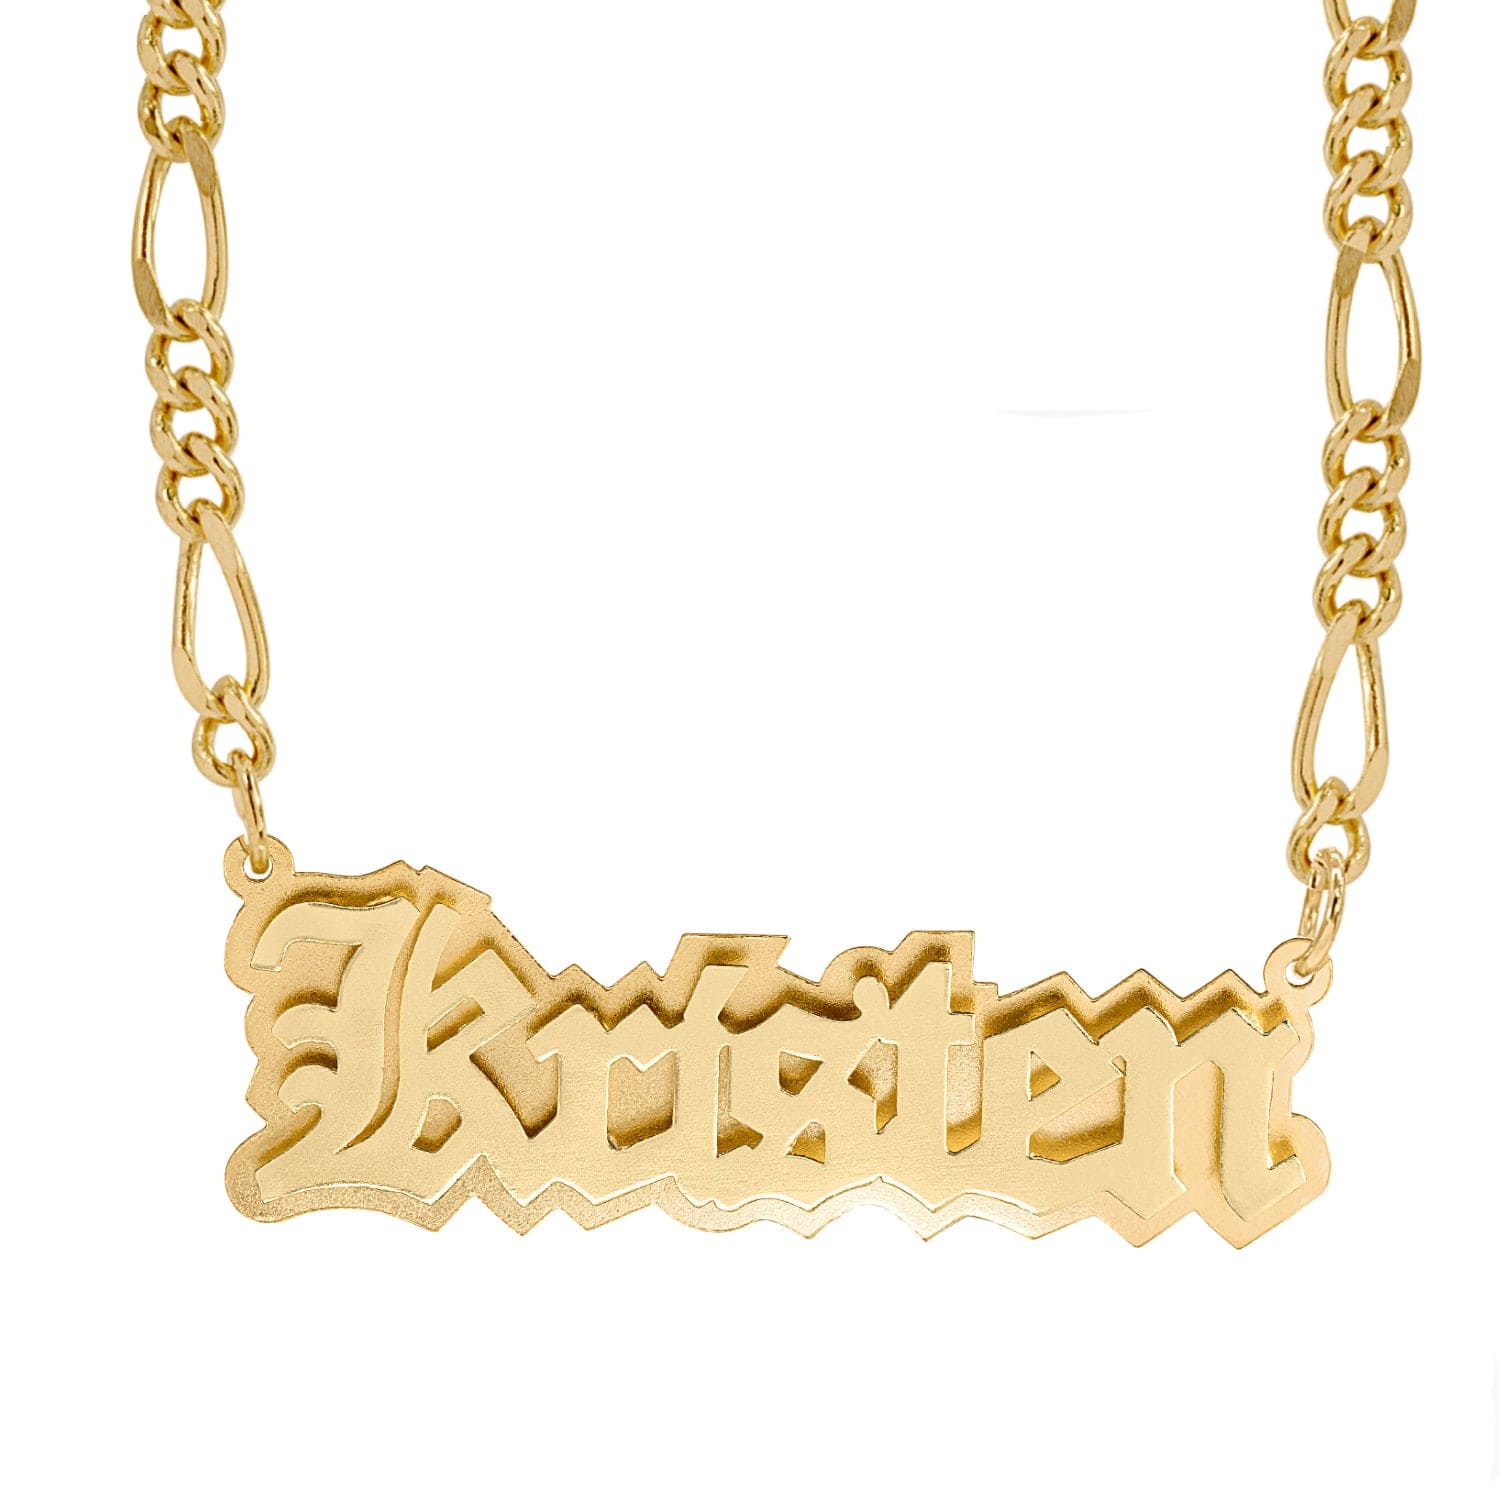 14k Gold over Sterling Silver / Figaro Chain Double Plated Nameplate Necklace "Kristen" With Figaro Chain